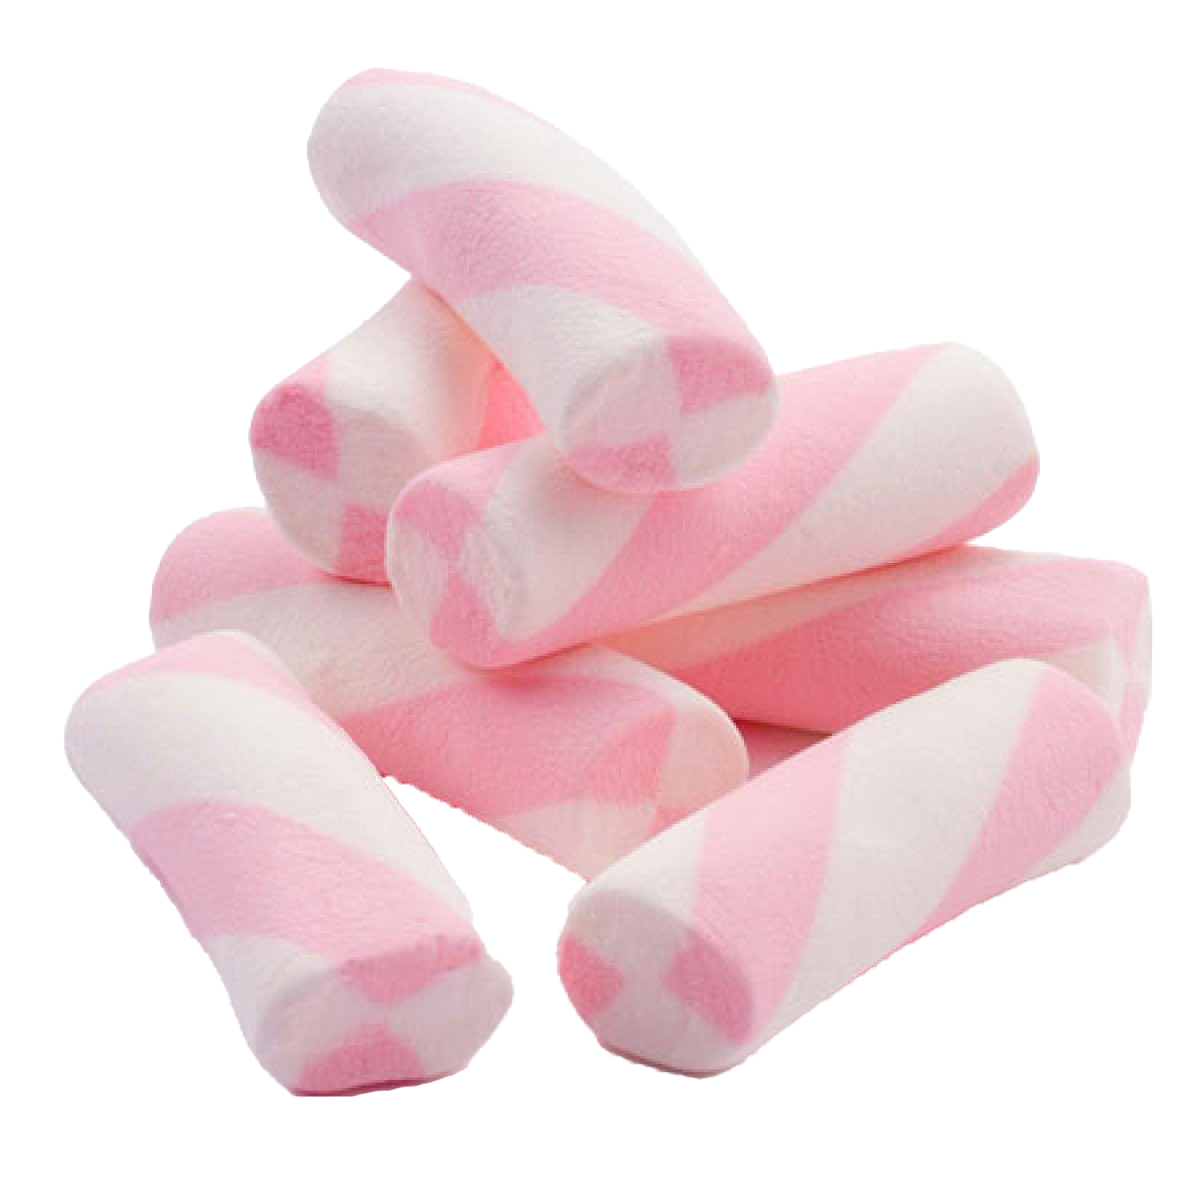 Pink Marshmallow PNG Free Photo PNG Image